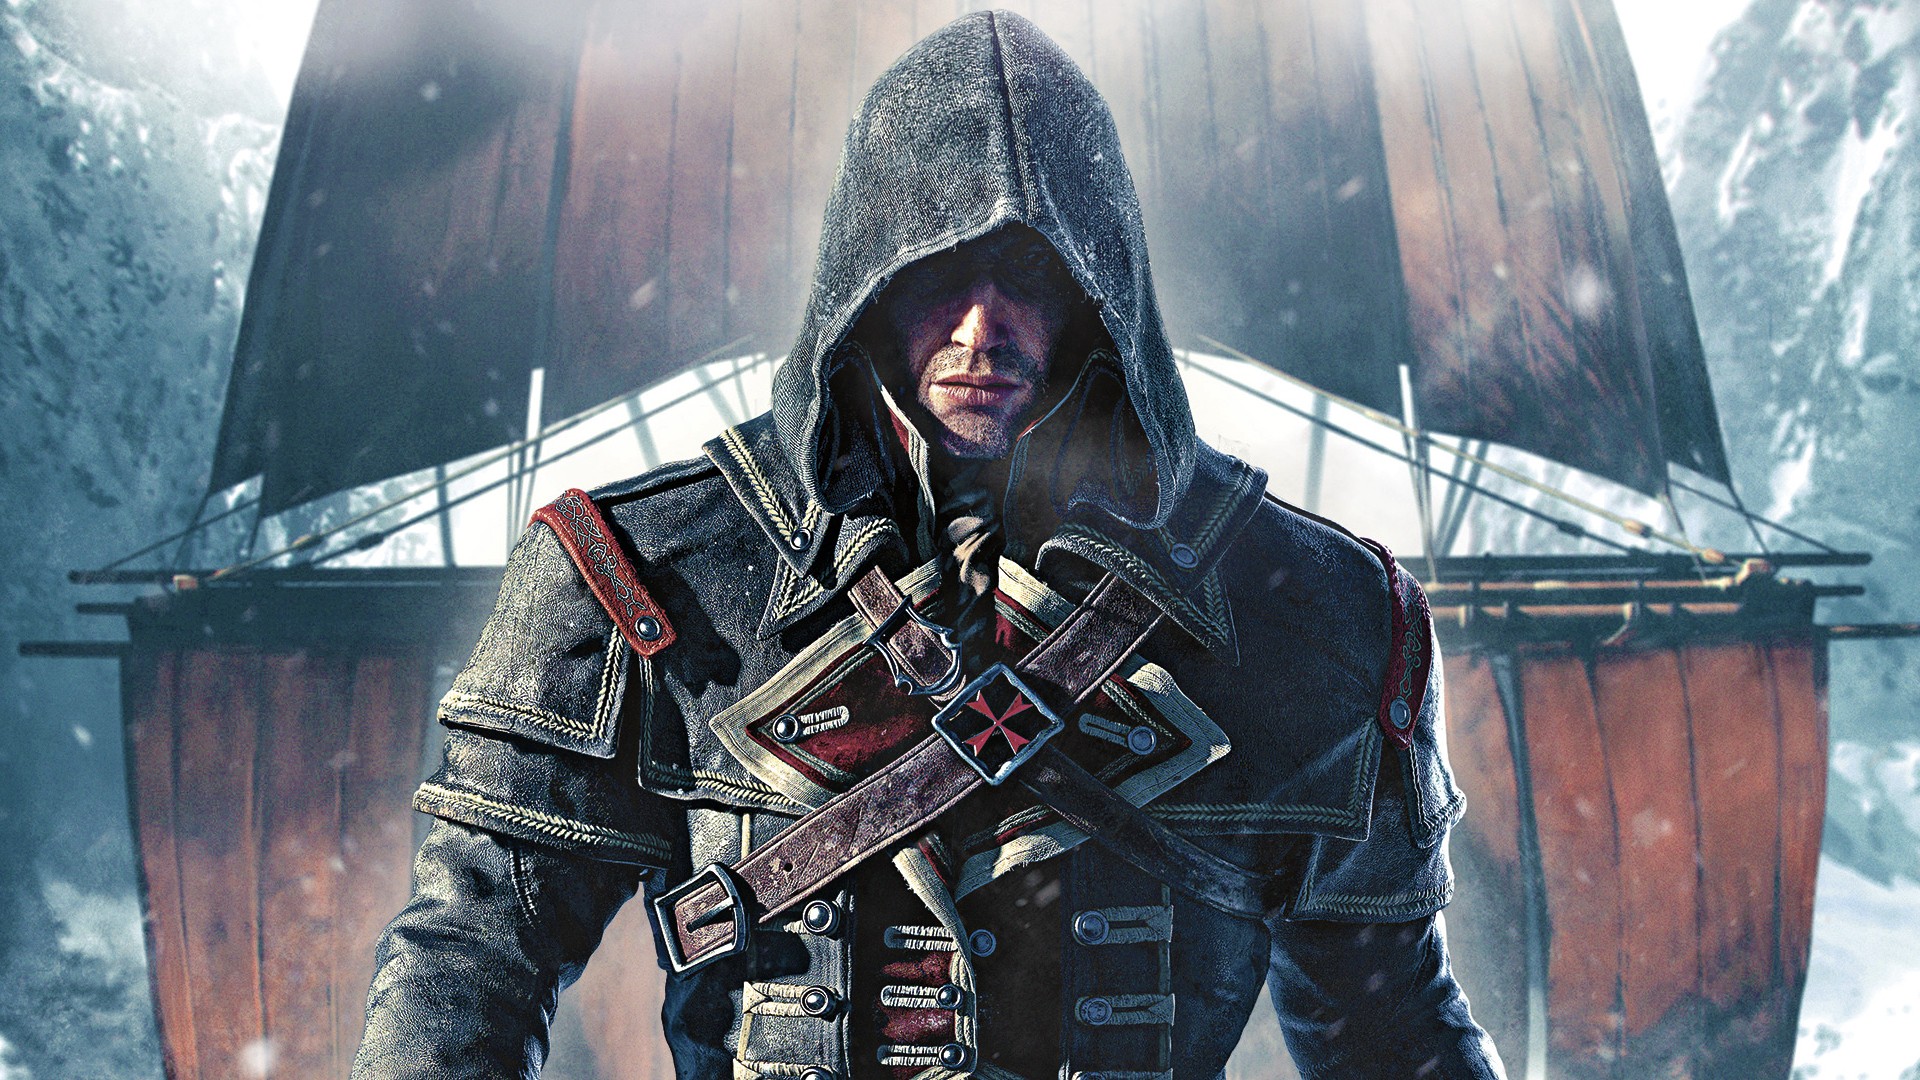 General 1920x1080 Assassin's Creed: Rogue video games Assassin's Creed hoods video game men video game art